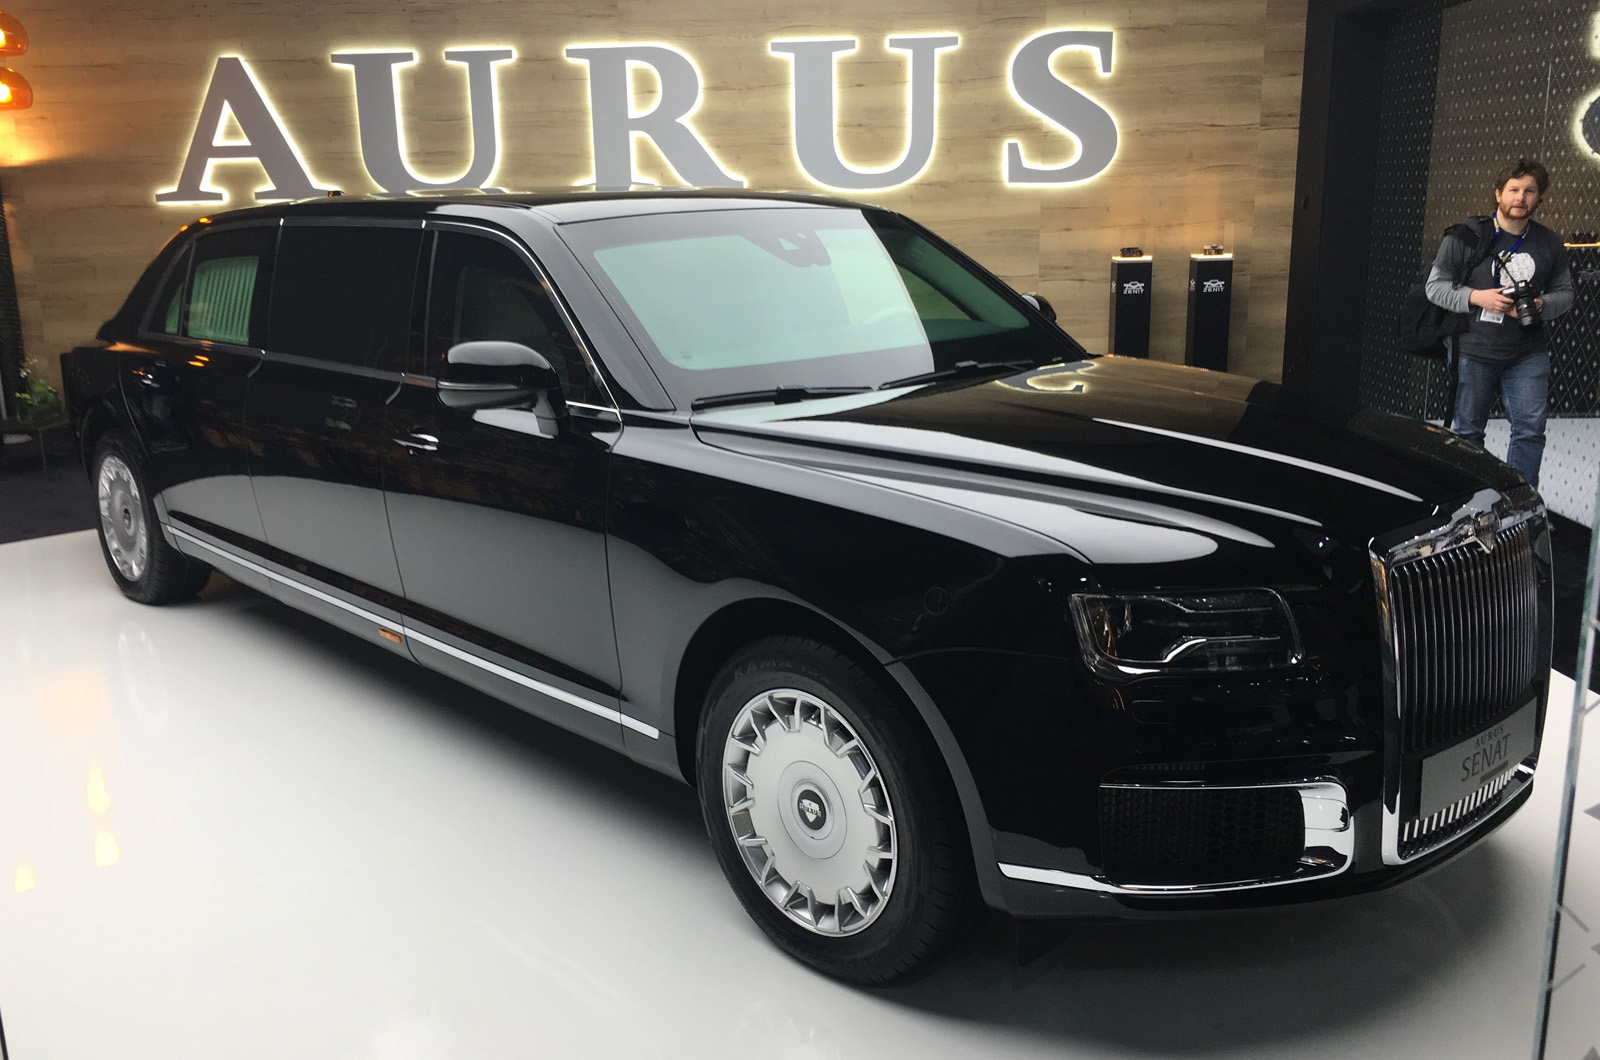 Vladimir Putins Aurus Senat: All you need to know about Russian  Presidential Limousine - IN PICS, News